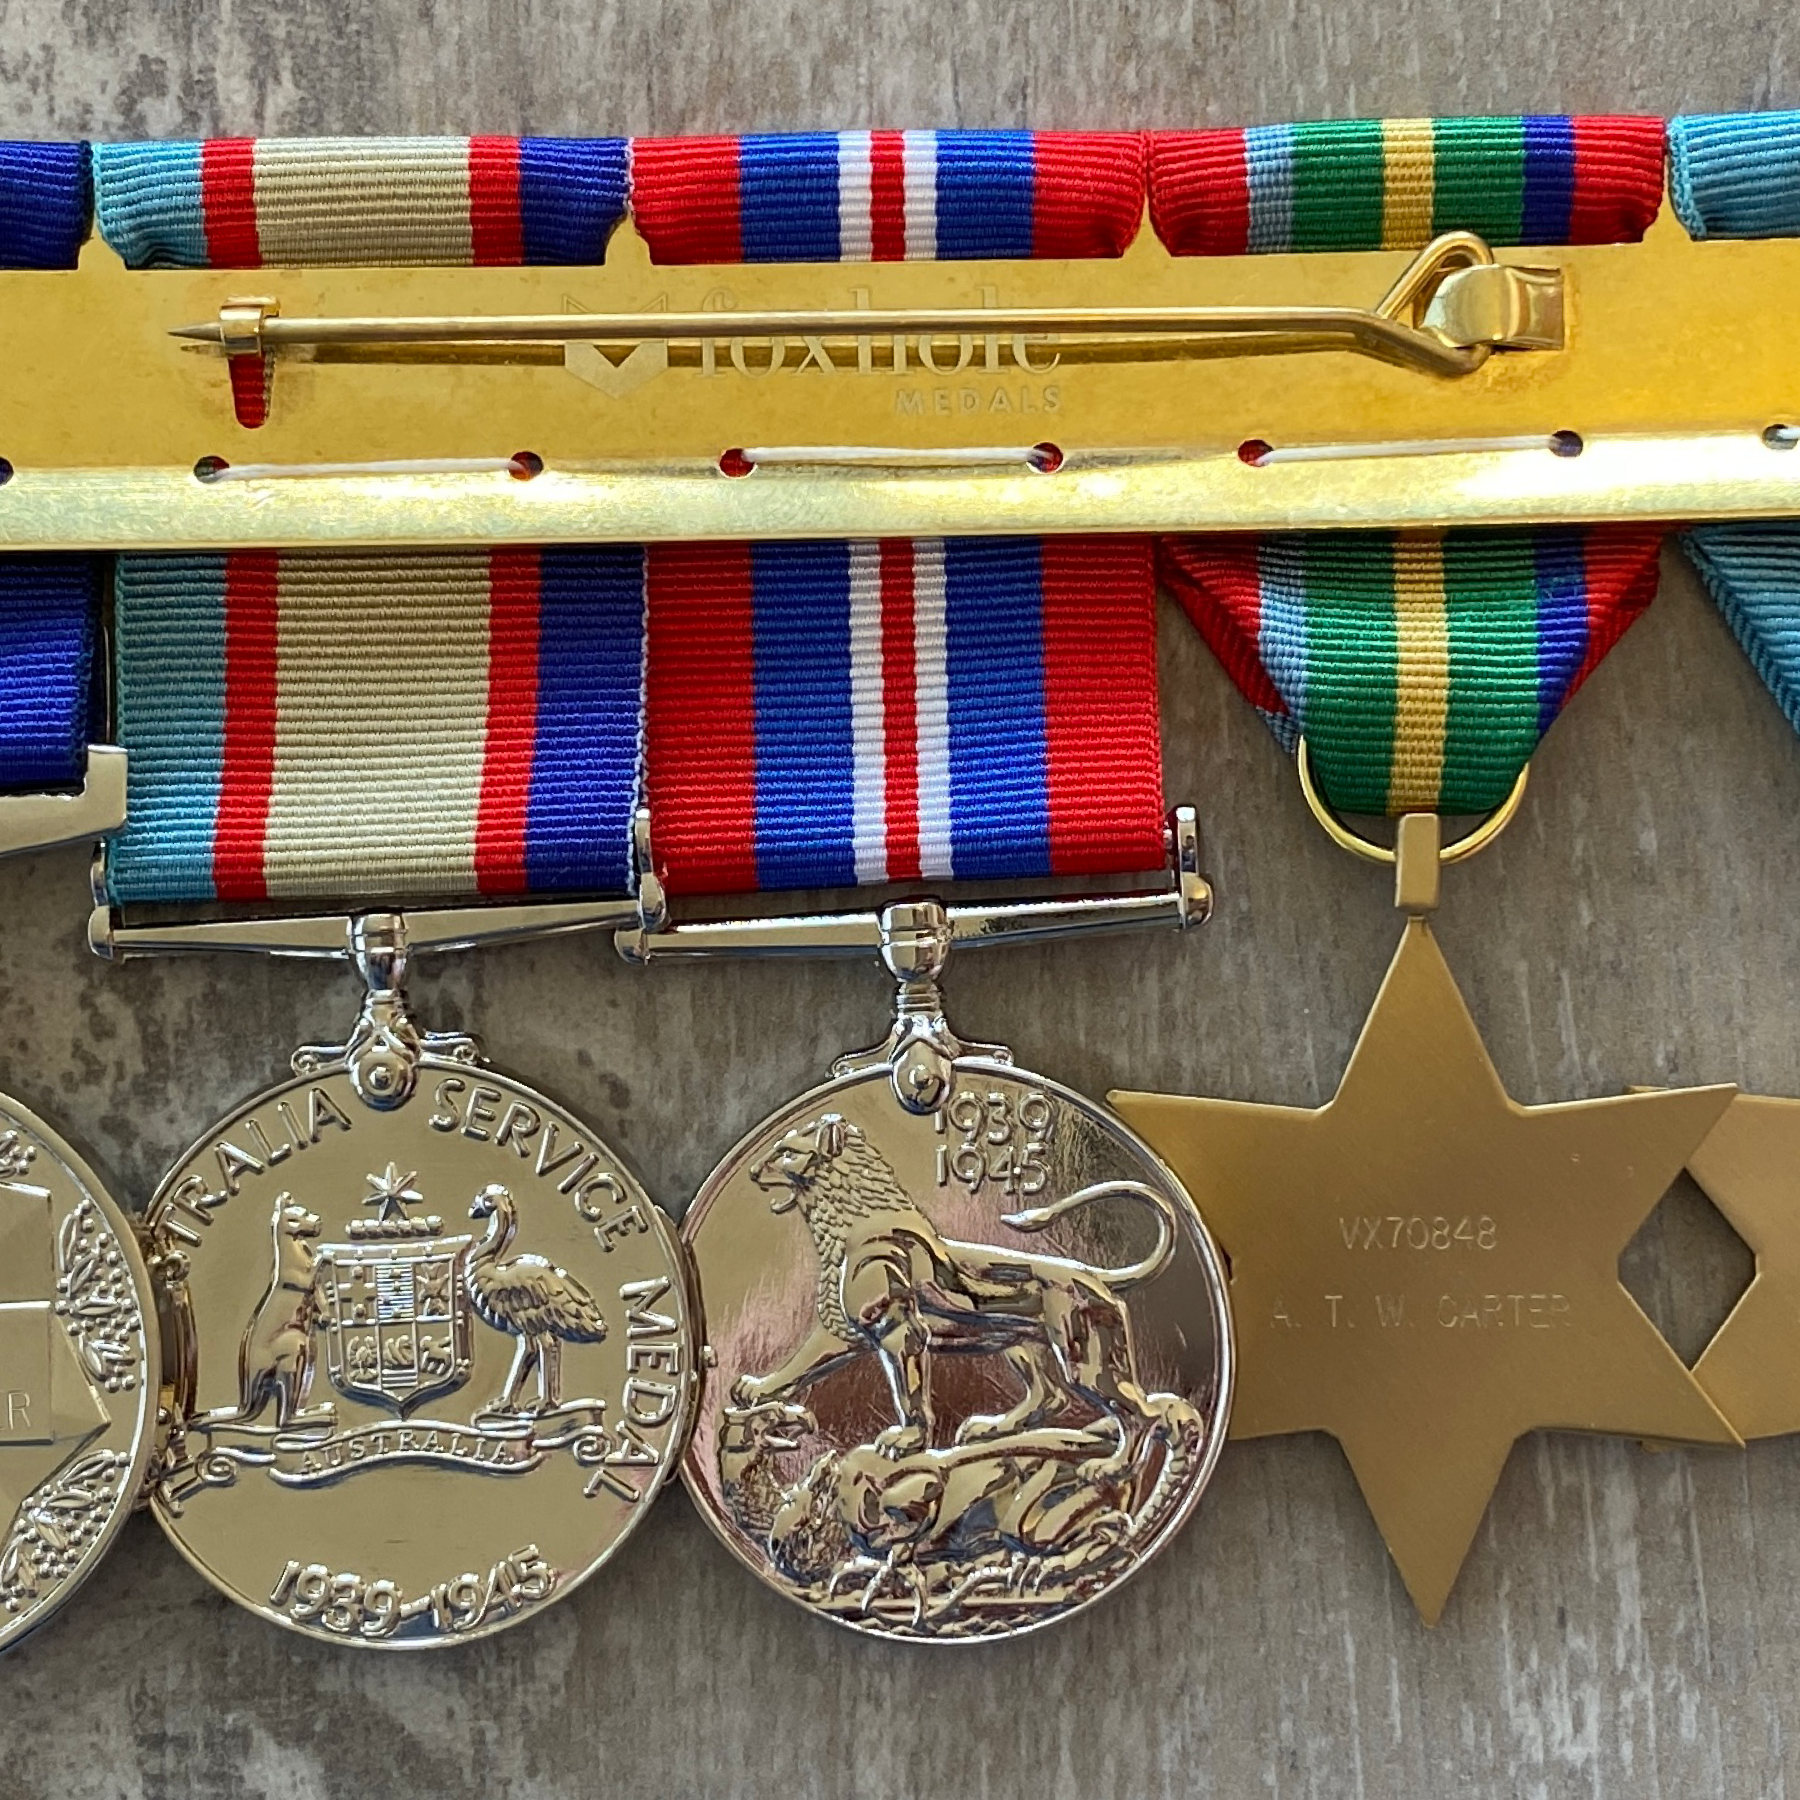 MEDAL MOUNTING - Court or Swing - Full Size/Miniature 